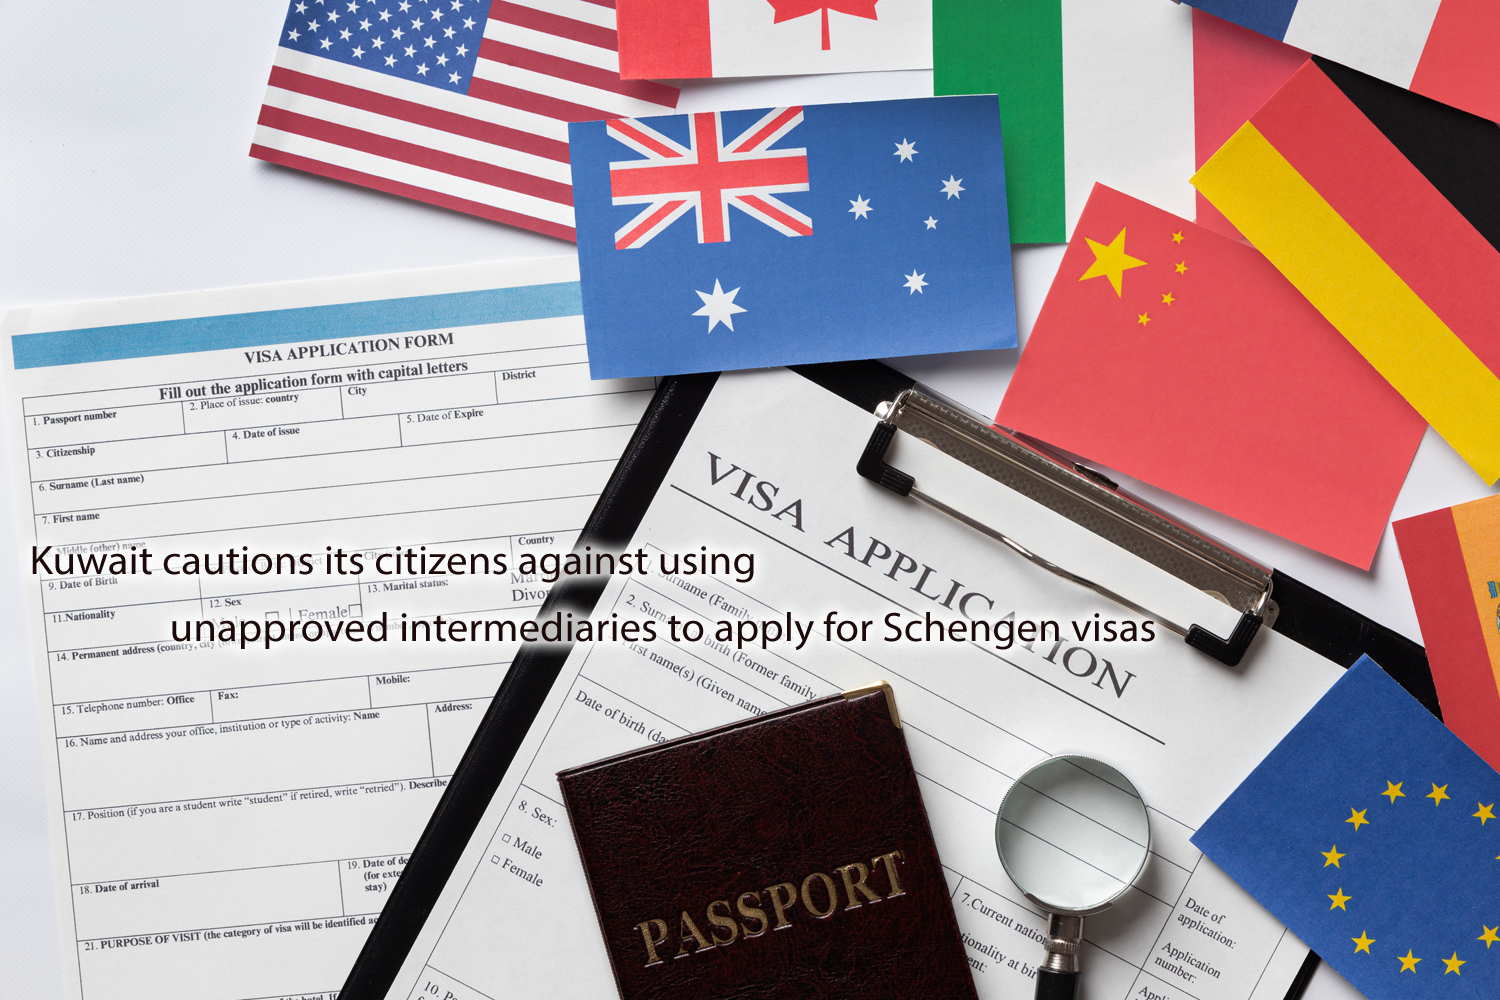 Kuwait cautions its citizens against using unapproved intermediaries to apply for Schengen visas.